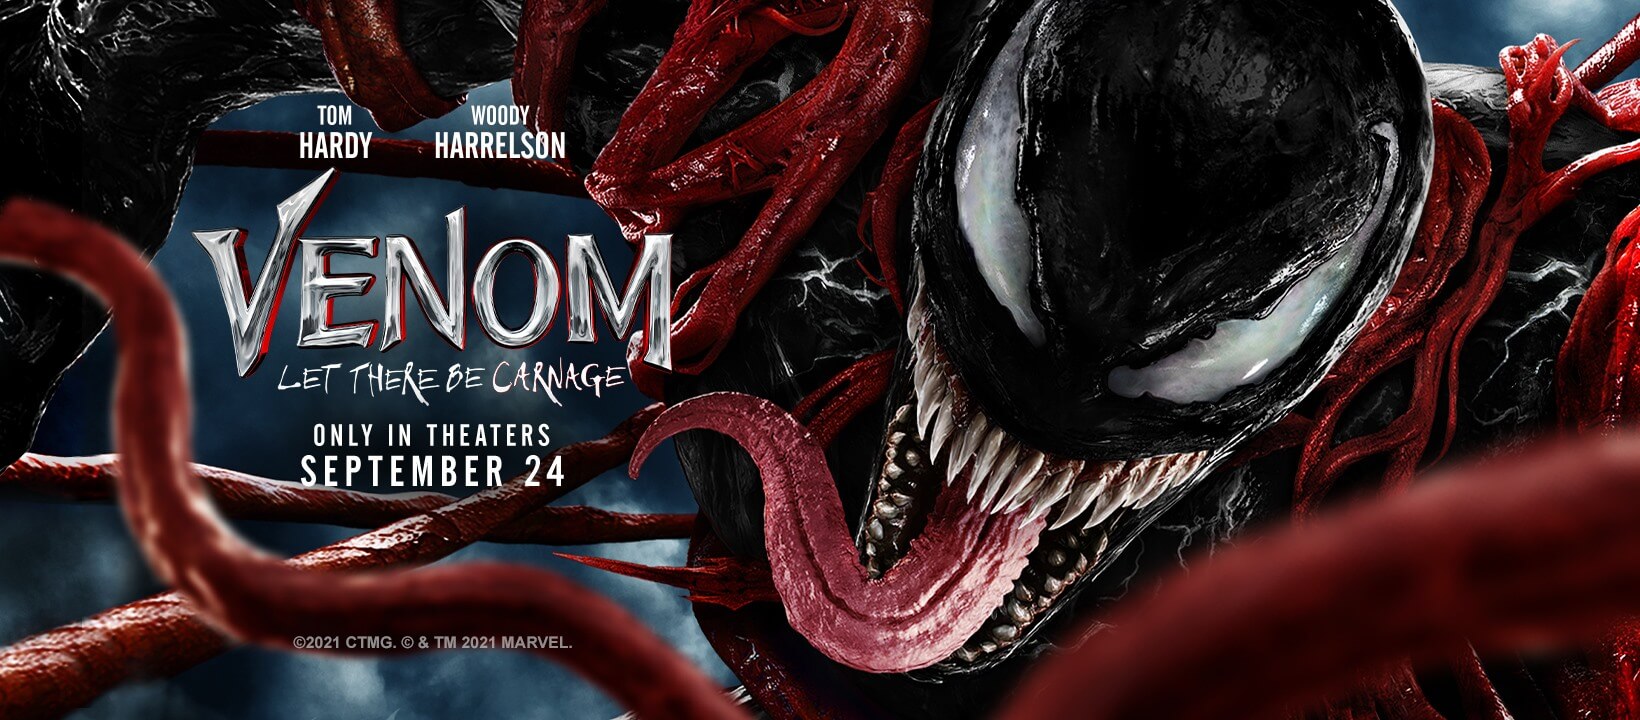 What Apps Is Venom Let There Be Carnage On Venom: Let there be Carnage mit neuem Trailer angekündigt - Beyond Pixels